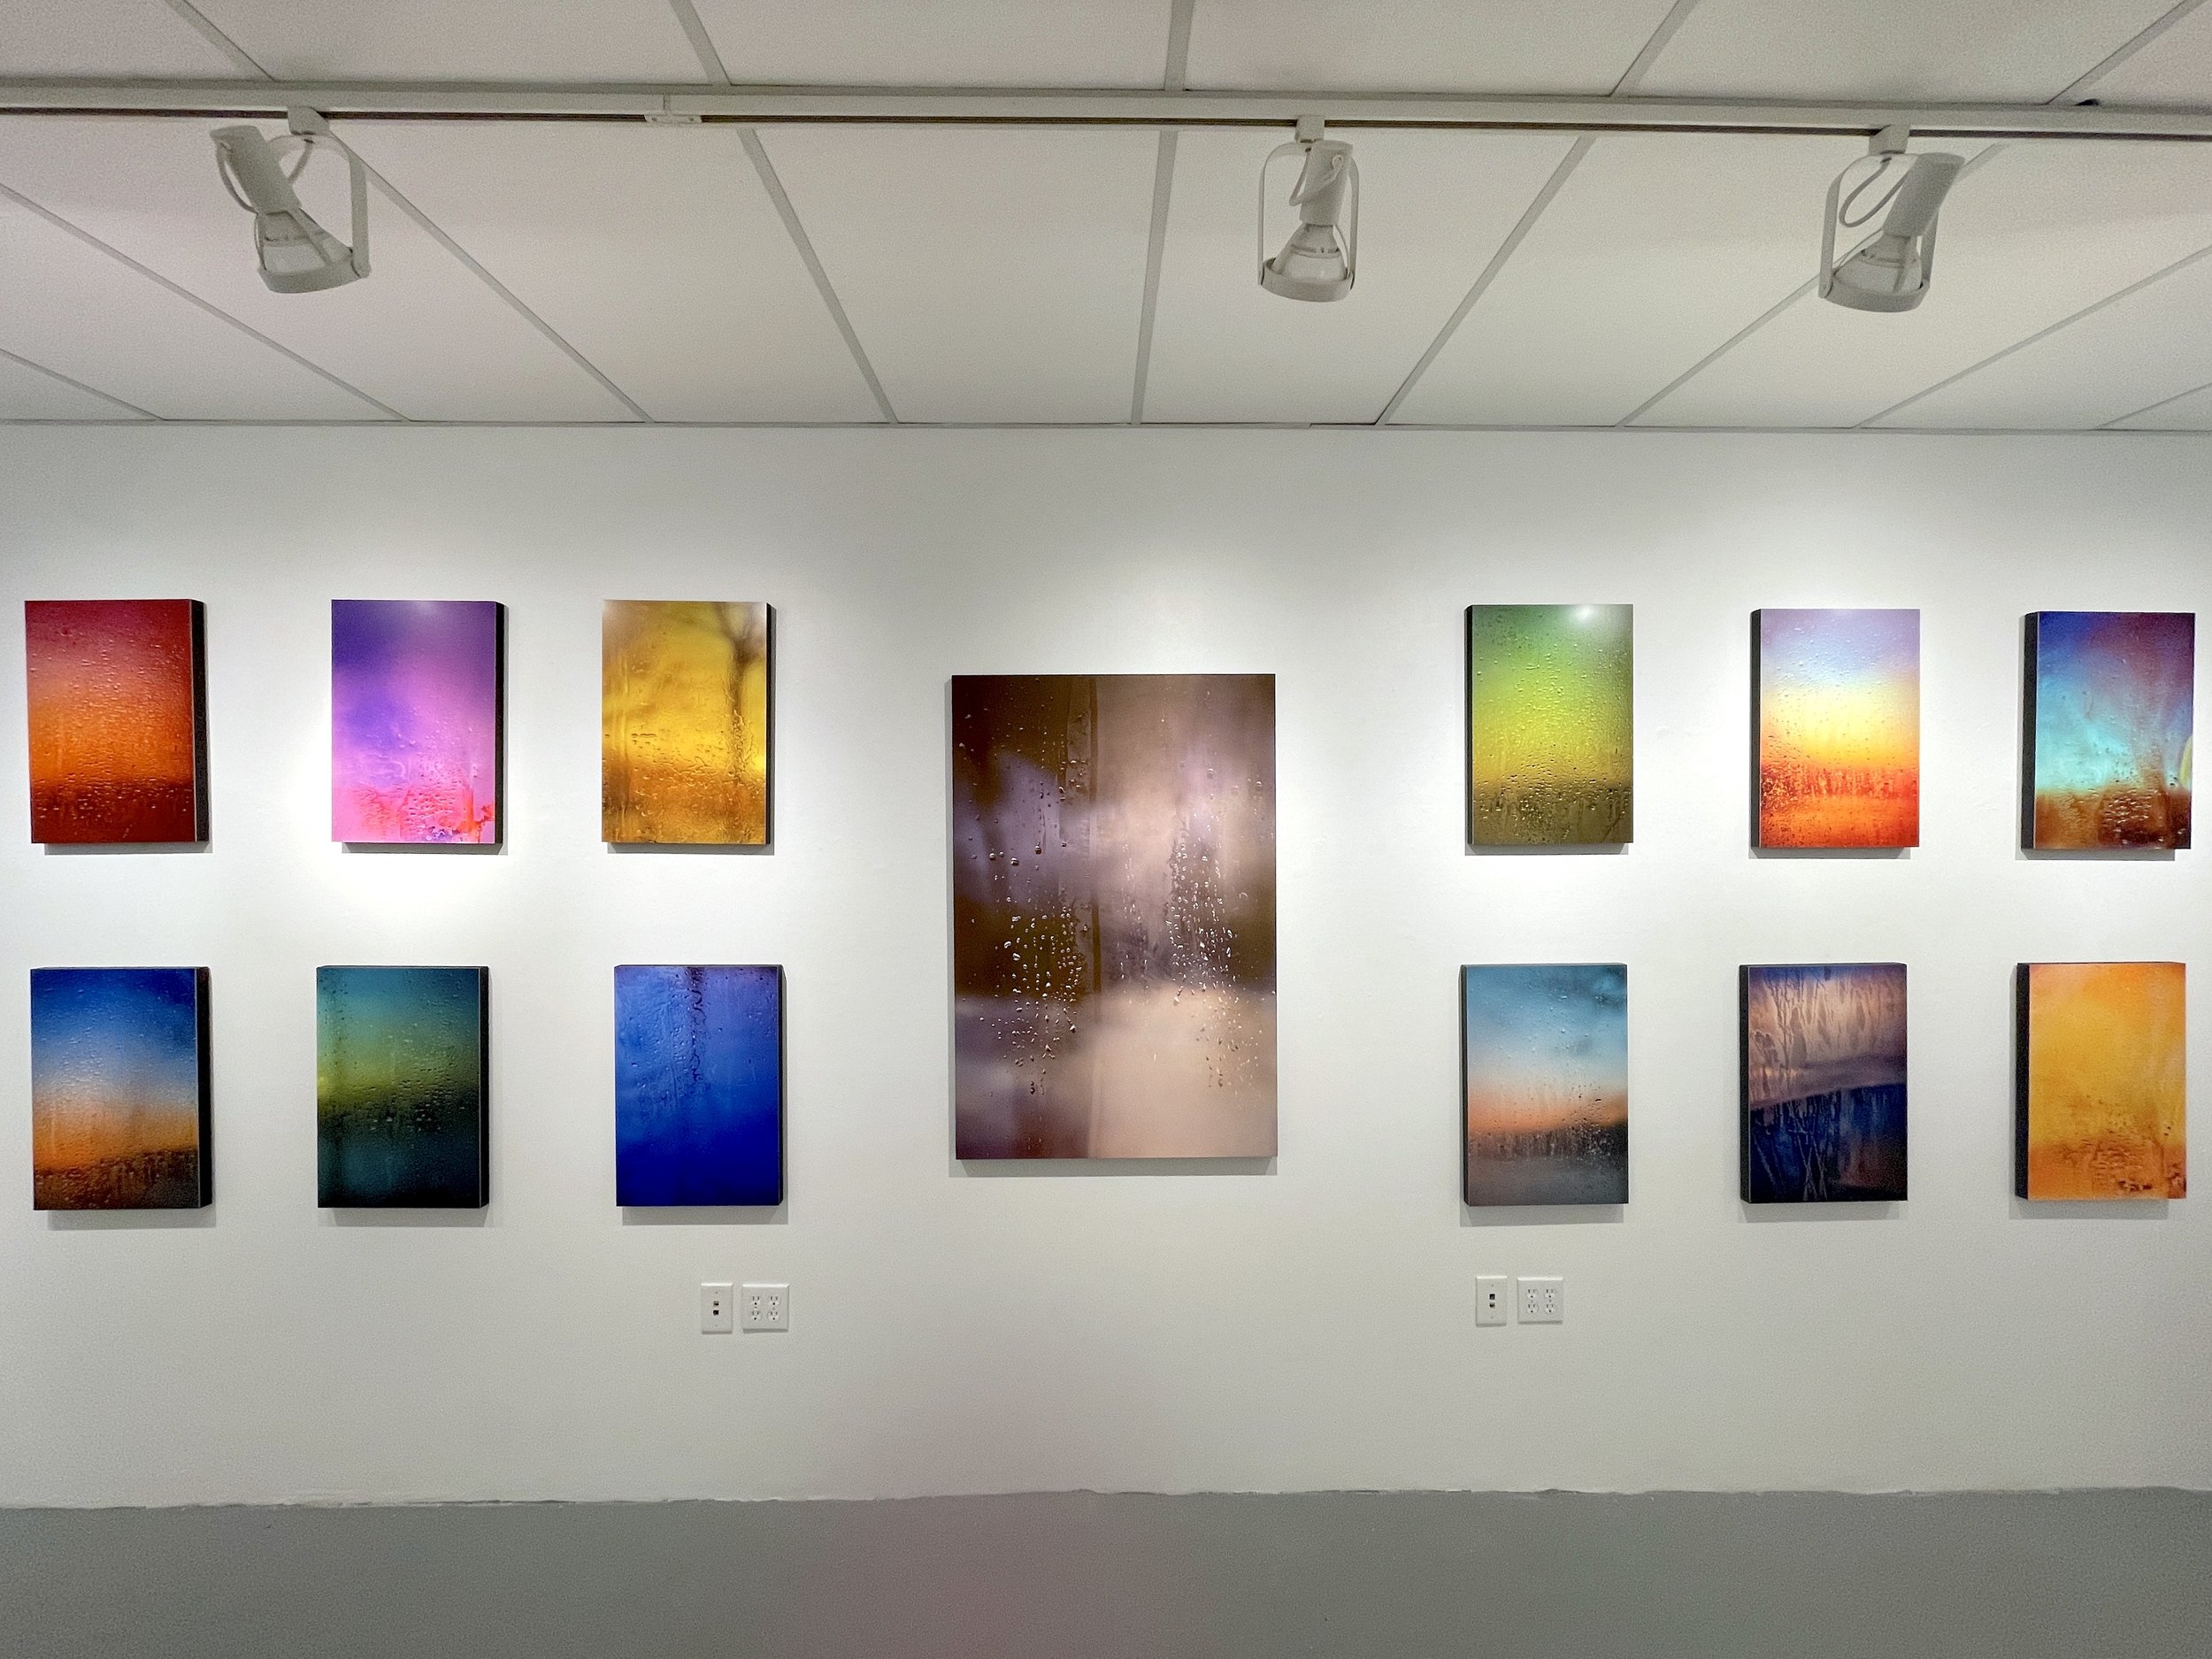   Windows  by Barbara Crane   Pictures of light and water   Lens Based - dye bond printed on aluminum&nbsp;  2021&nbsp;&nbsp;  &nbsp;   Short Arc&nbsp;   &nbsp;   Gaslight   &nbsp;   First Light   &nbsp;   Poleward Sky   &nbsp;   Dichromatic Spectra 